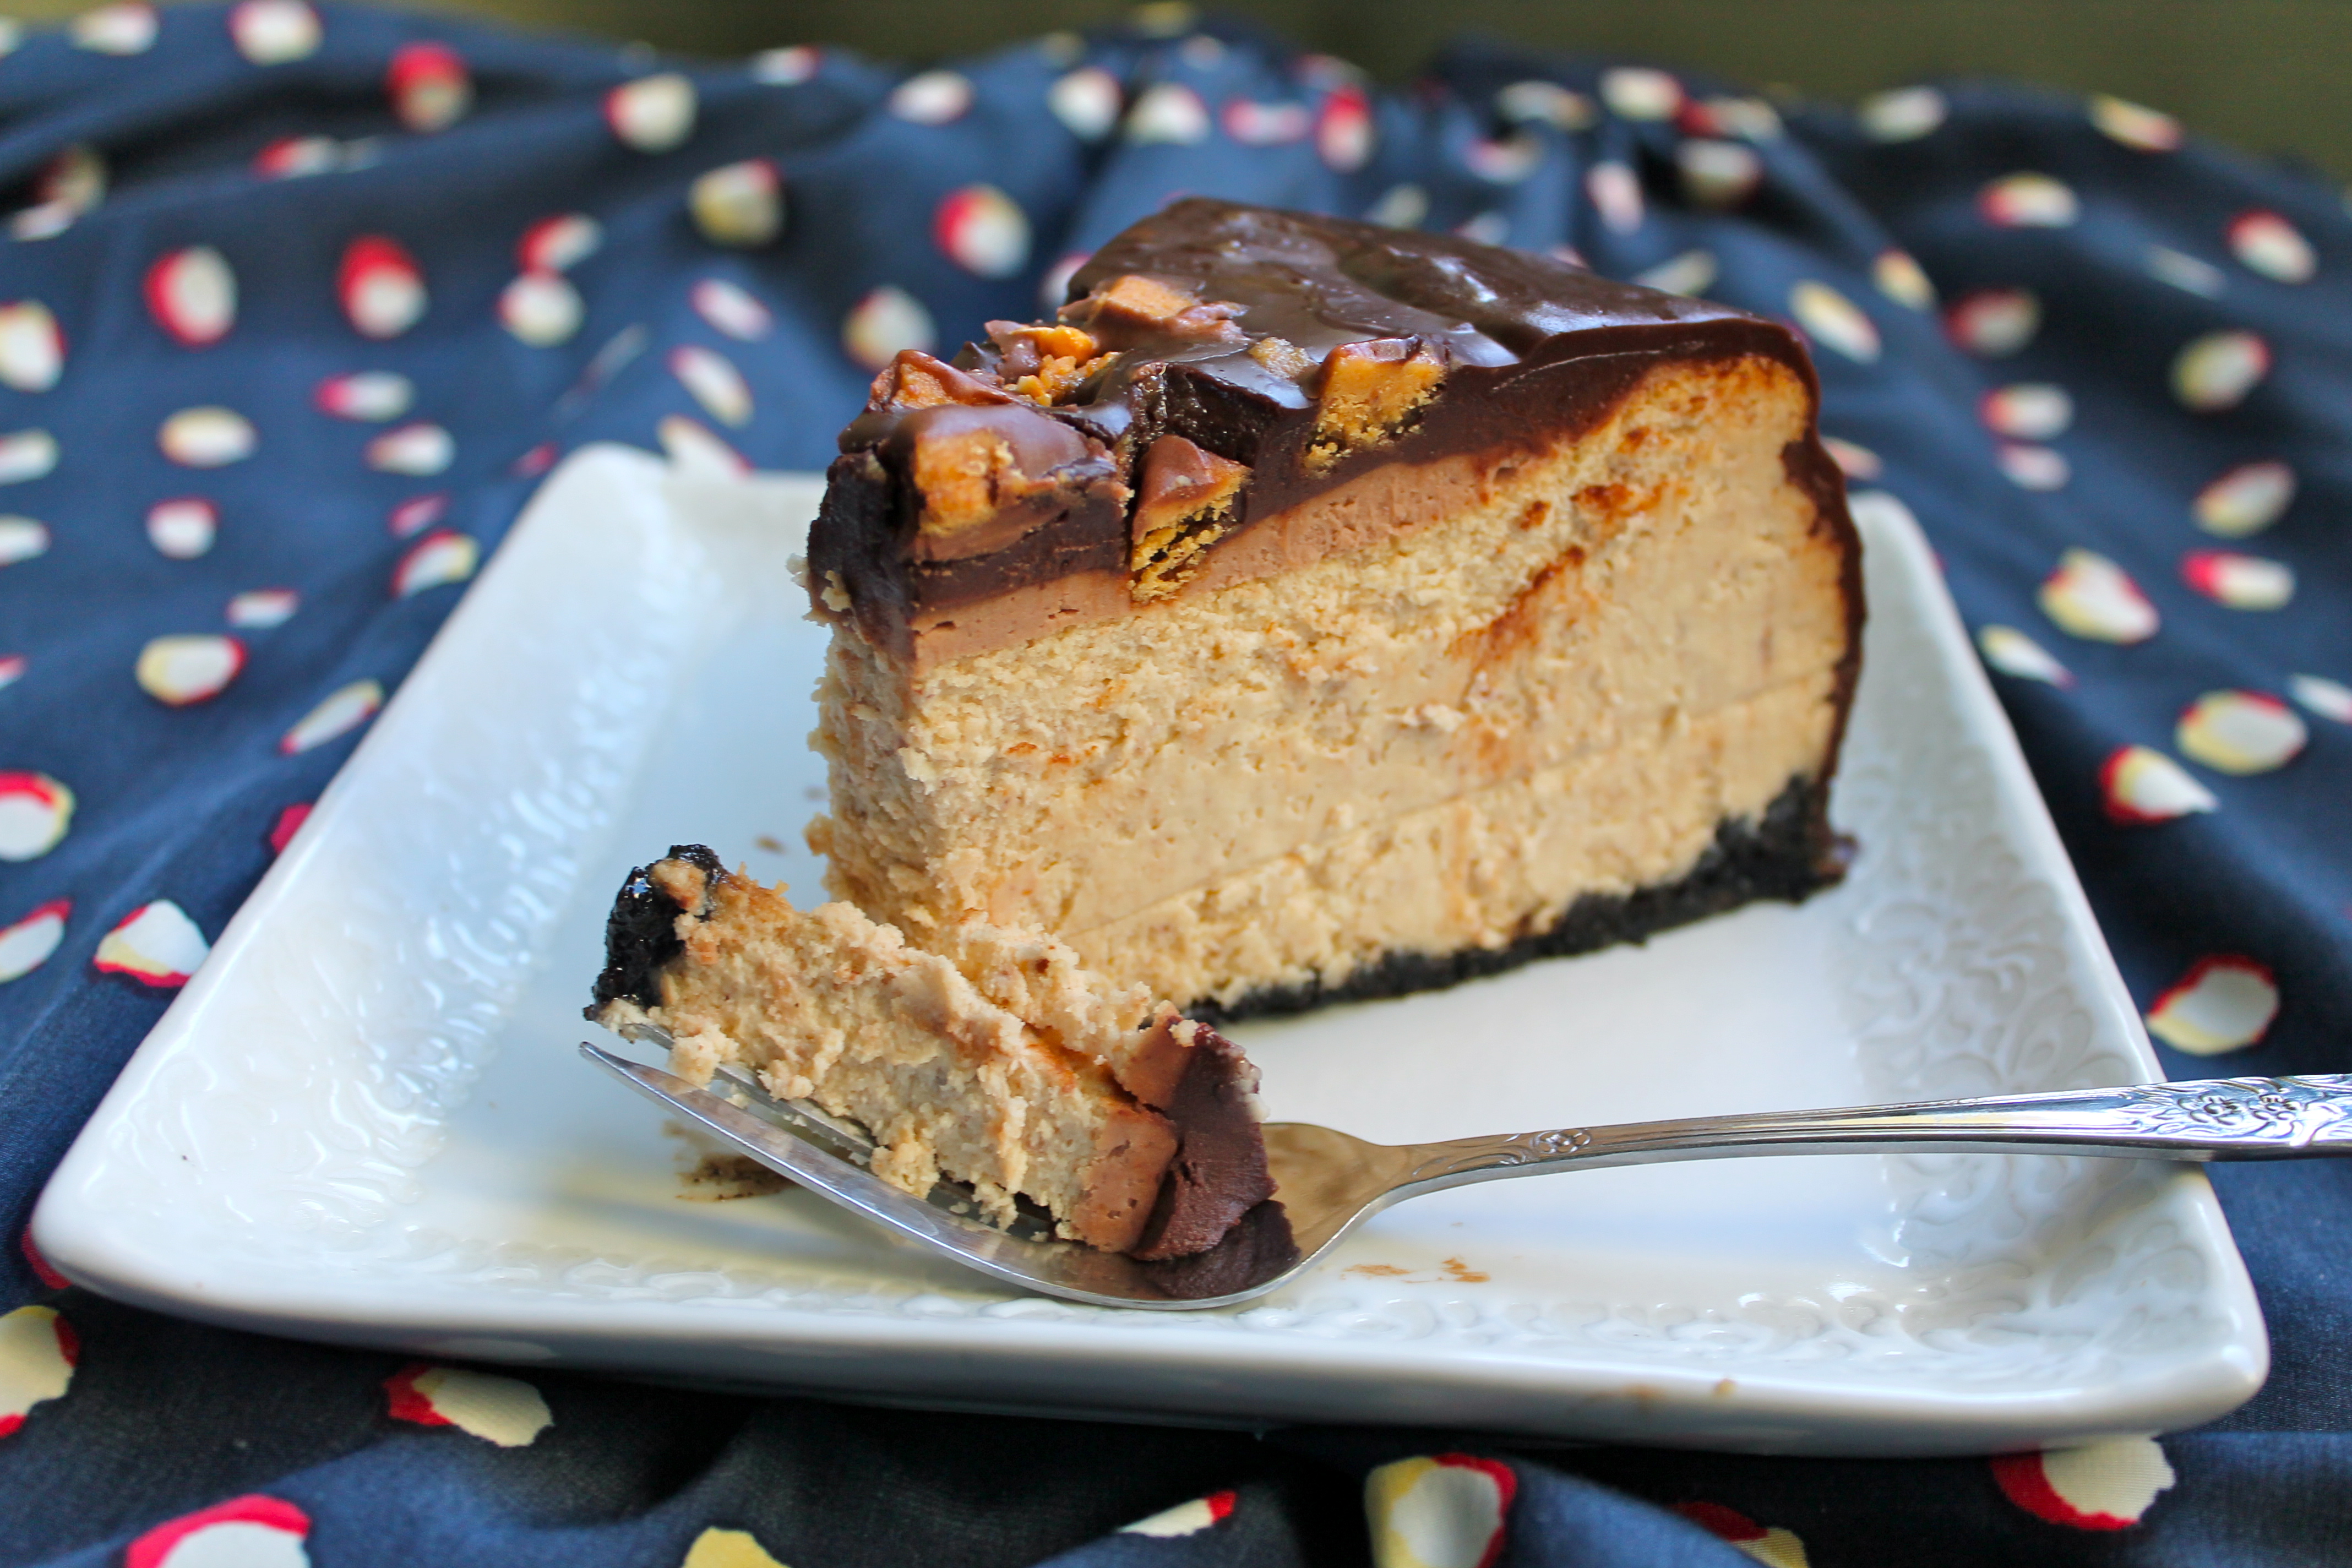 Chocolate and Peanut Butter Cheesecake